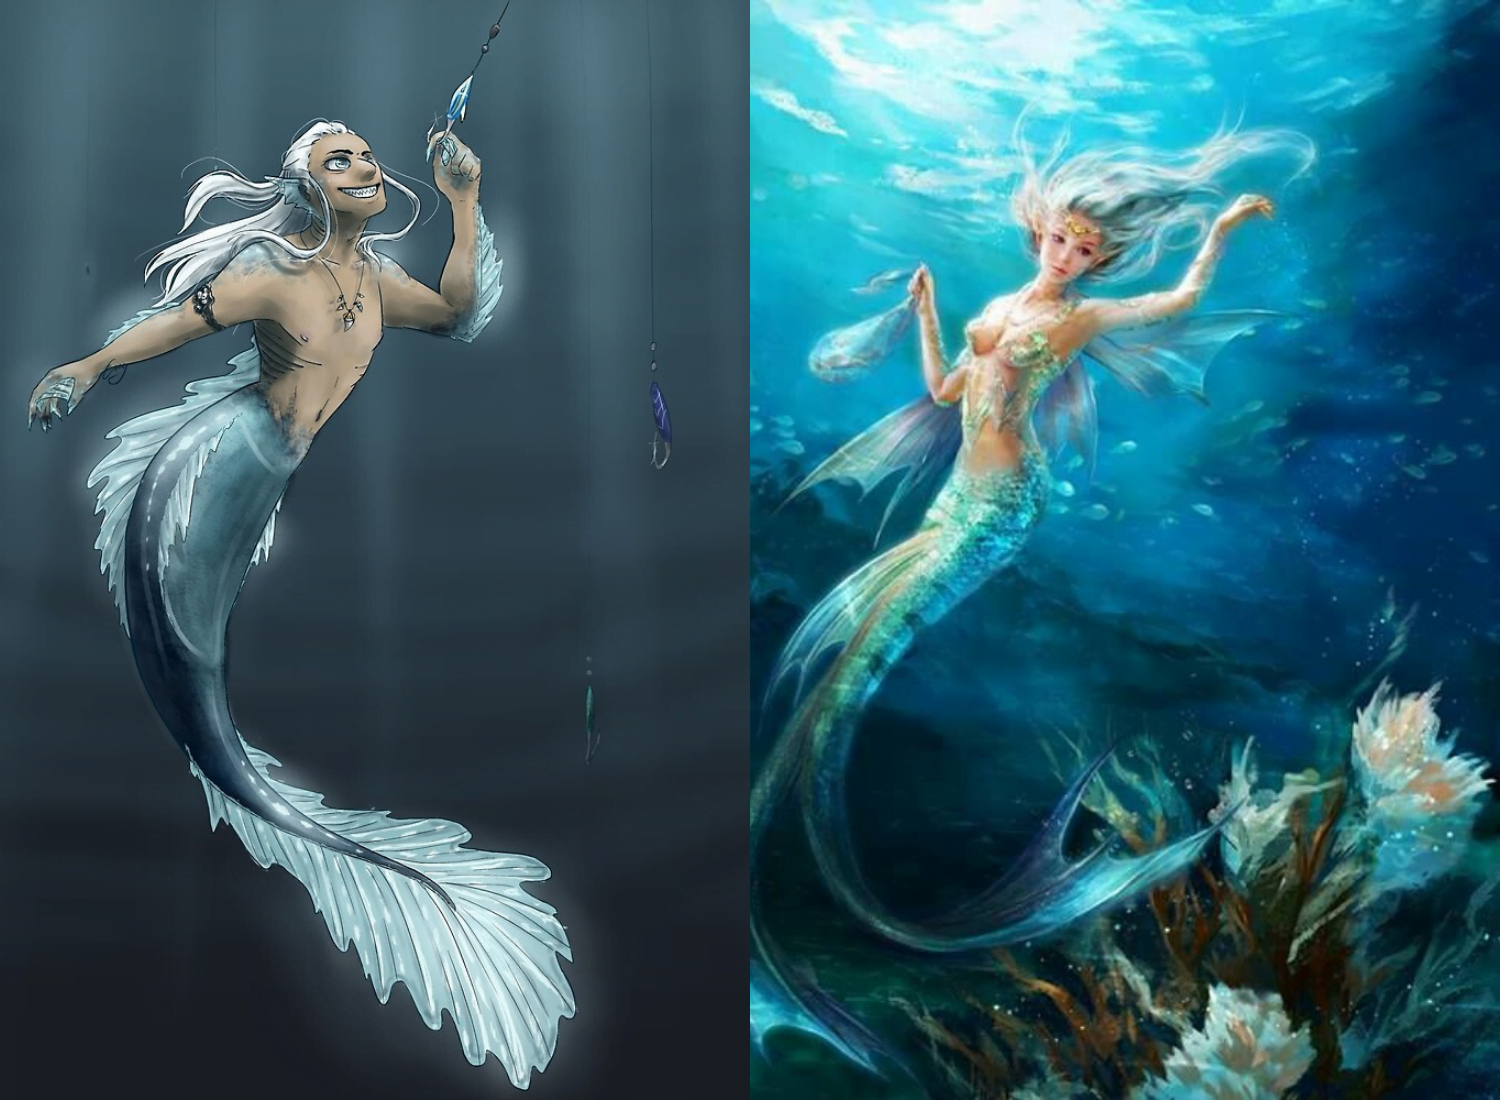 Mermaids: Creatures of Fantasy or a Hidden Reality?